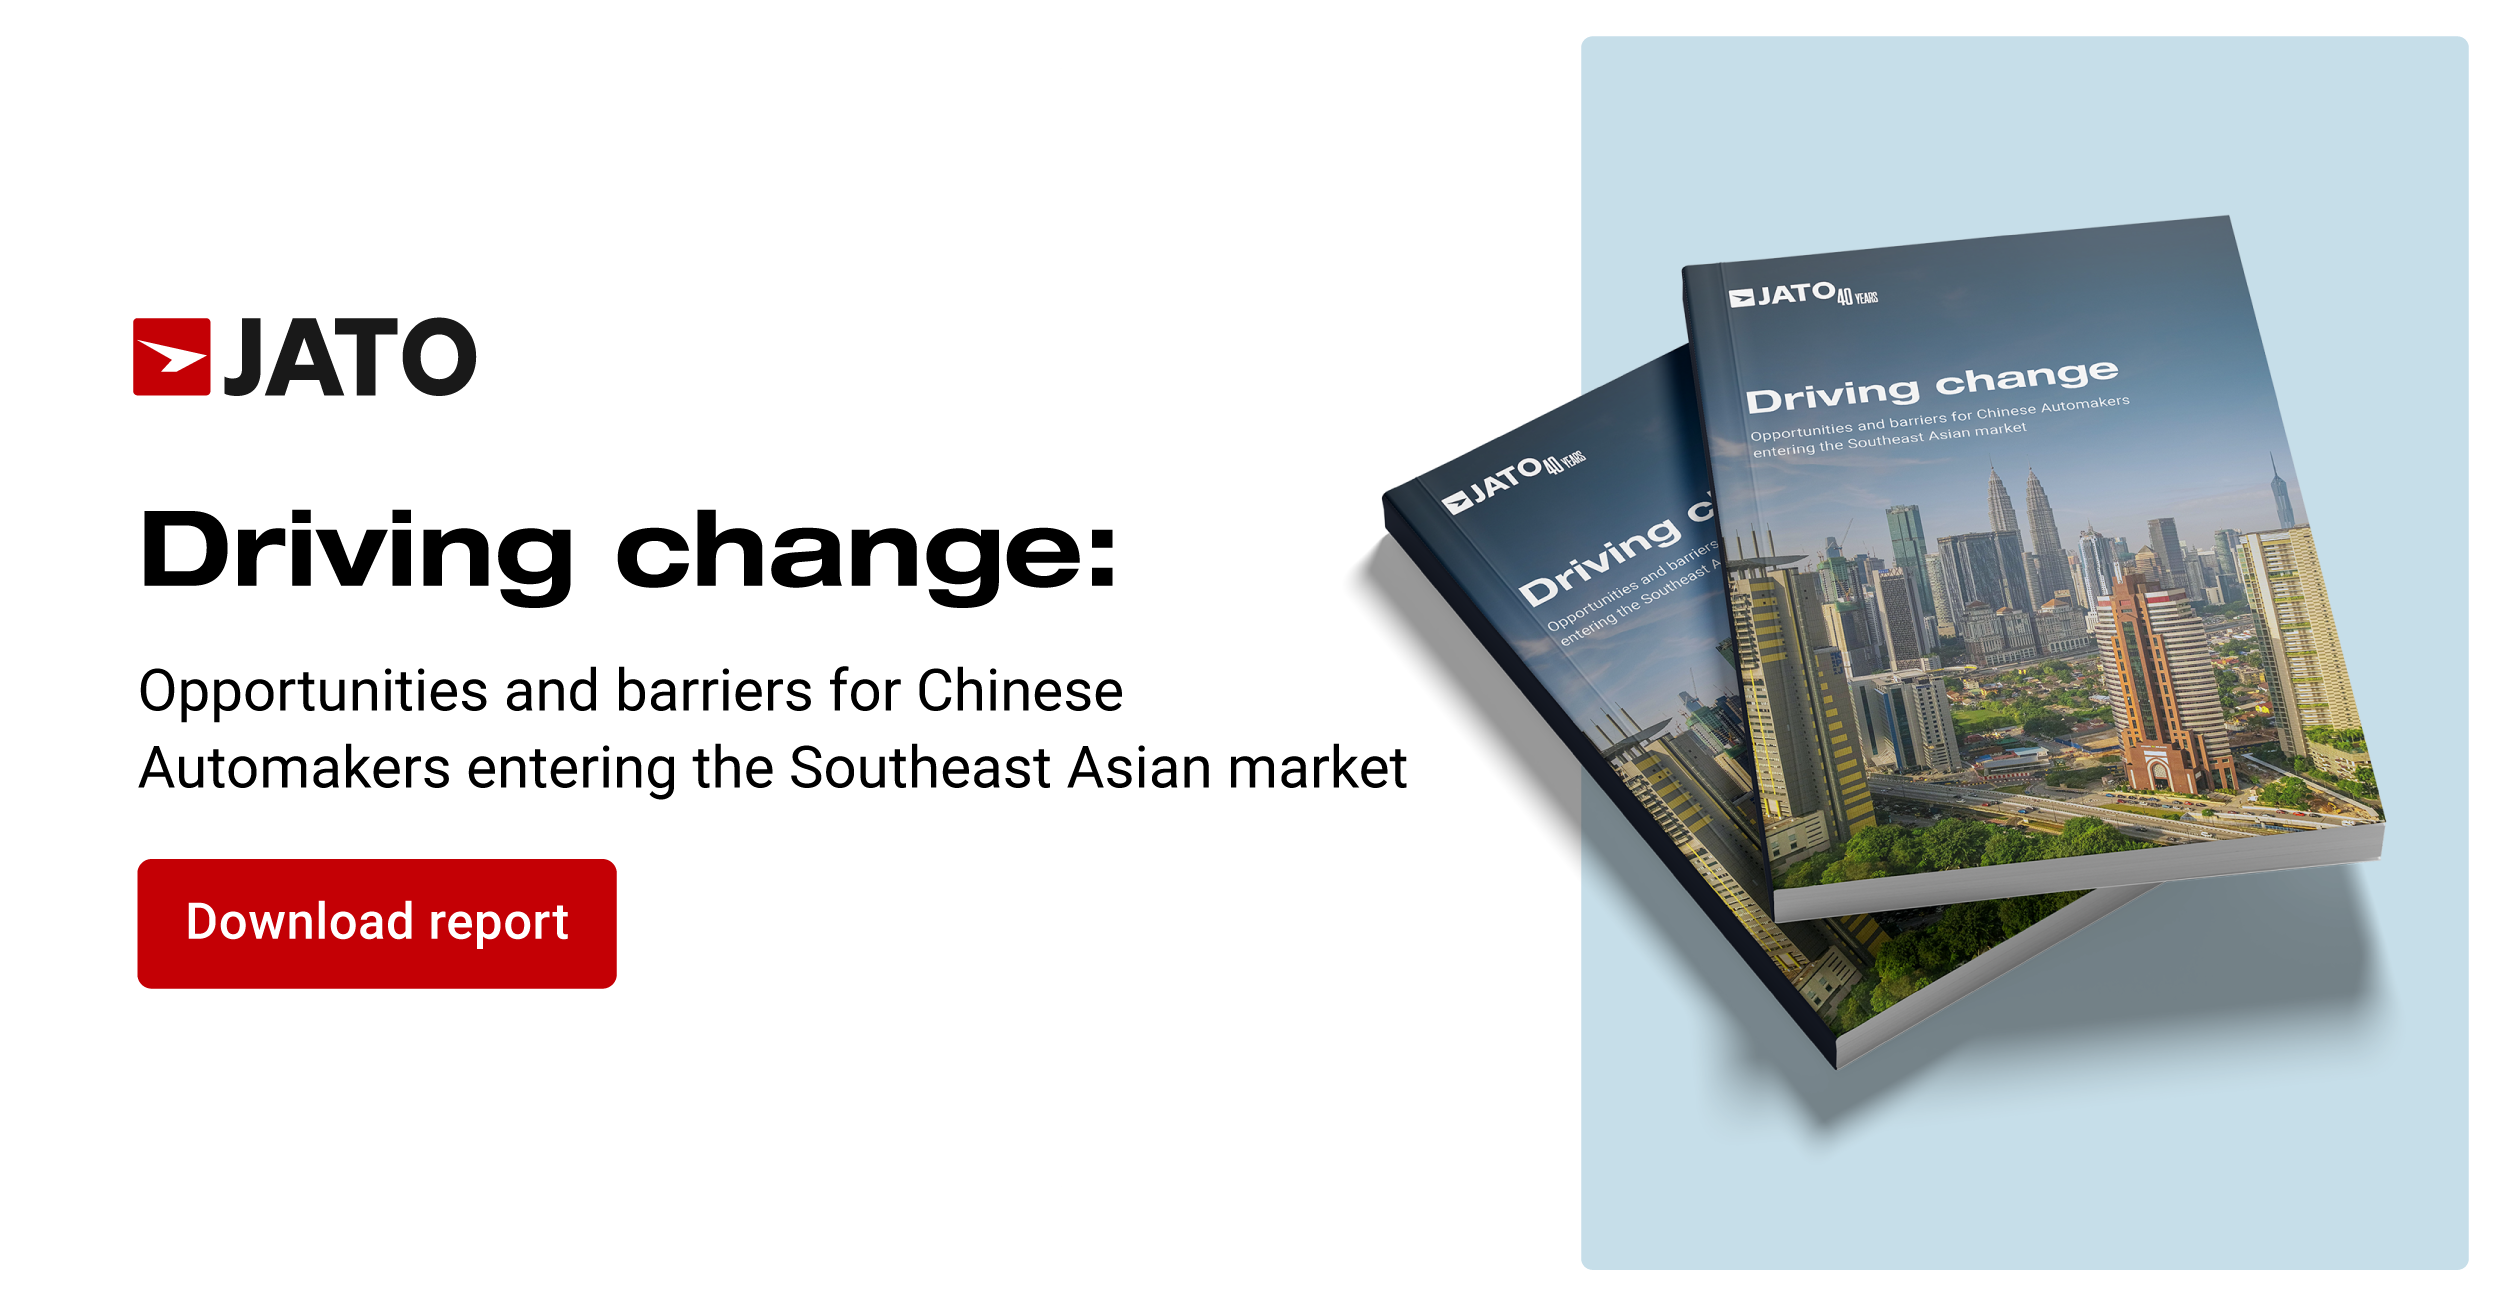 JATO report: Opportunities and barriers for Chinese automakers in Southeast Asia